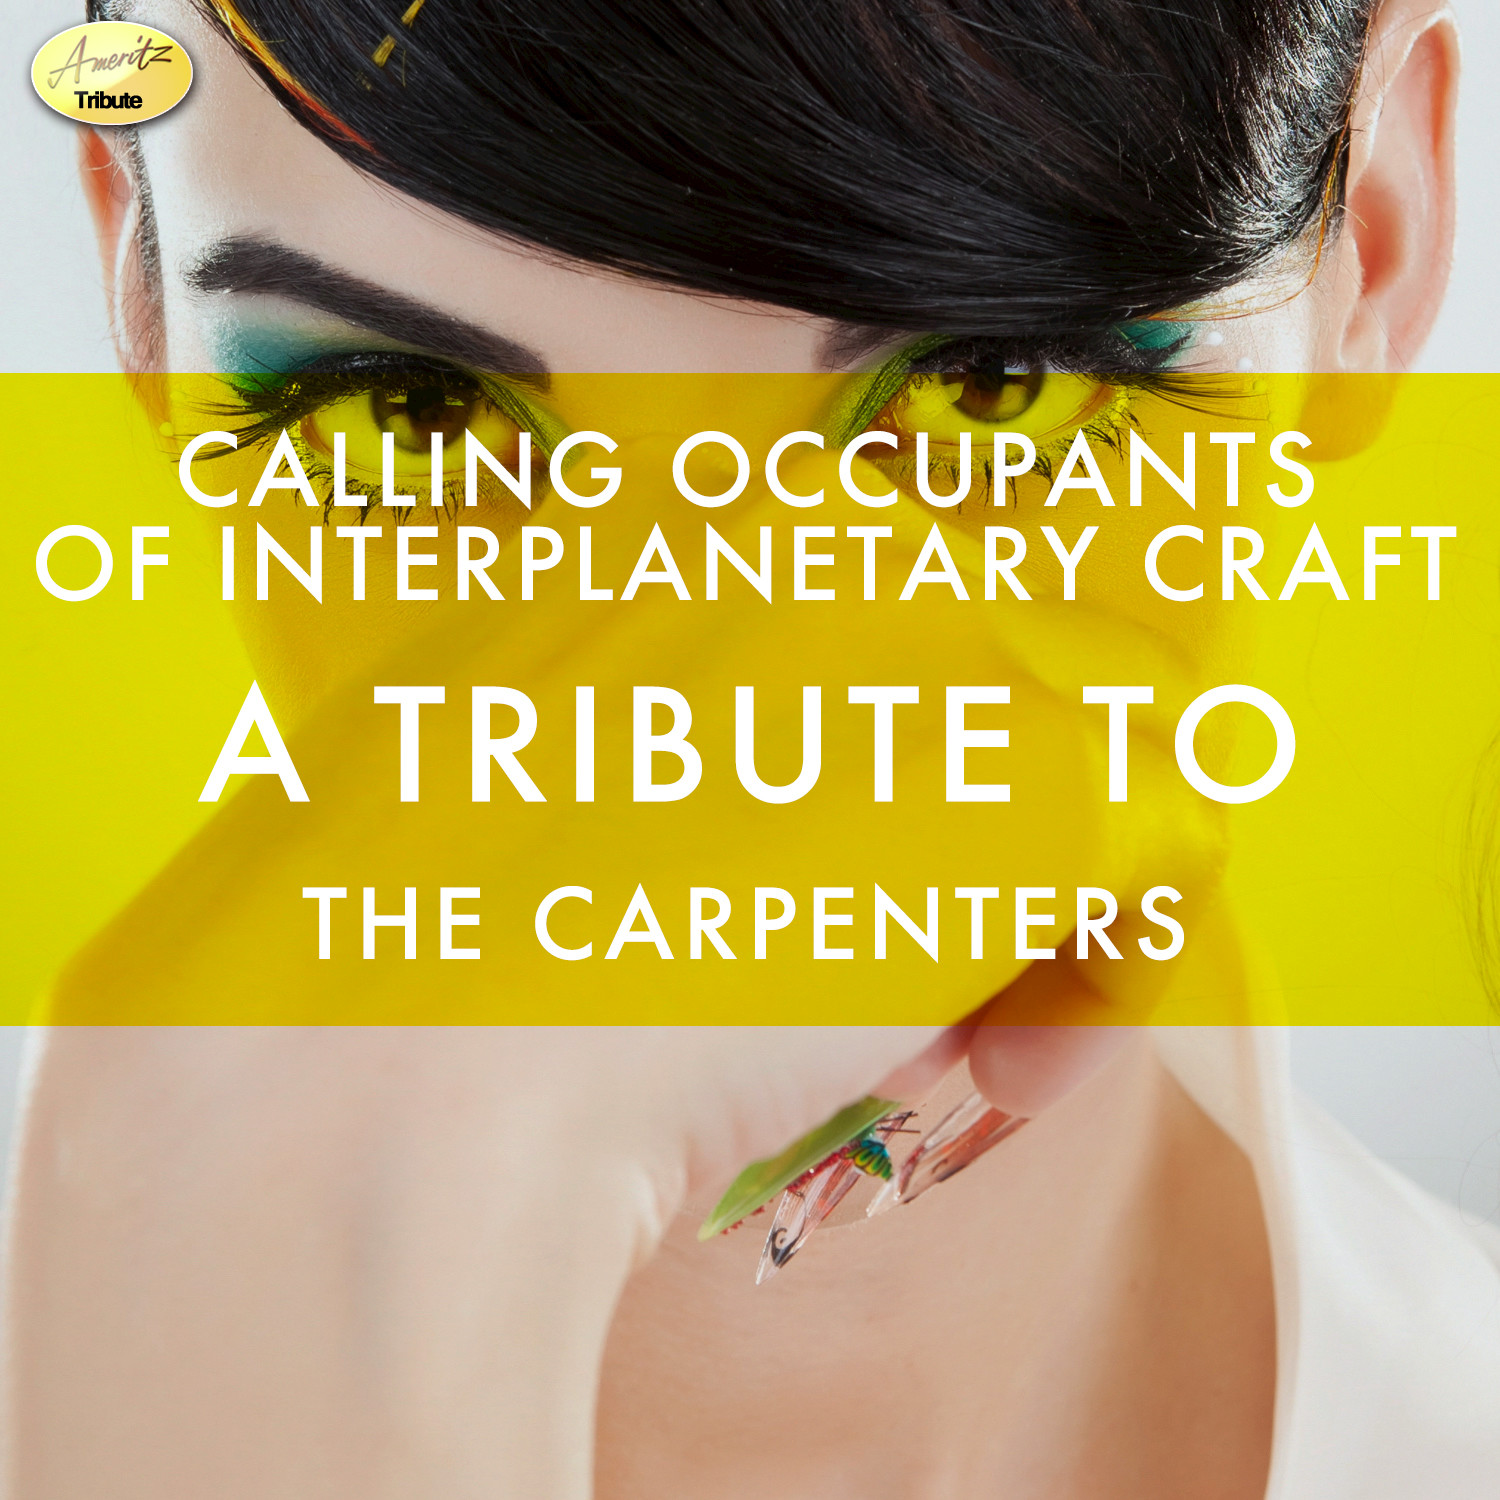 Calling Occupants of Interplanetary Craft - A Tribute to Carpenters